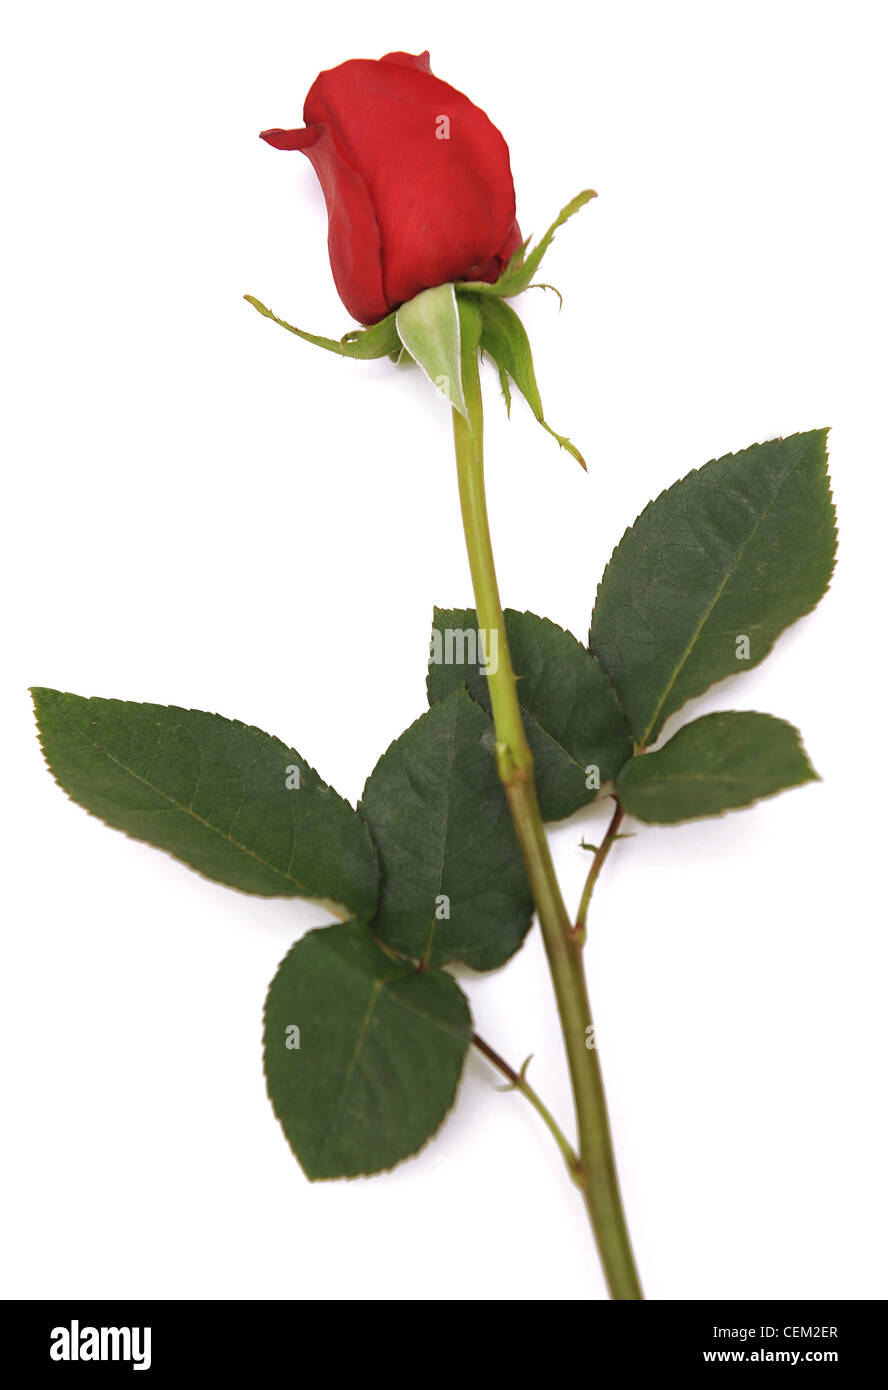 A still life image of red rose with long stem and leaves on white background Stock Photo